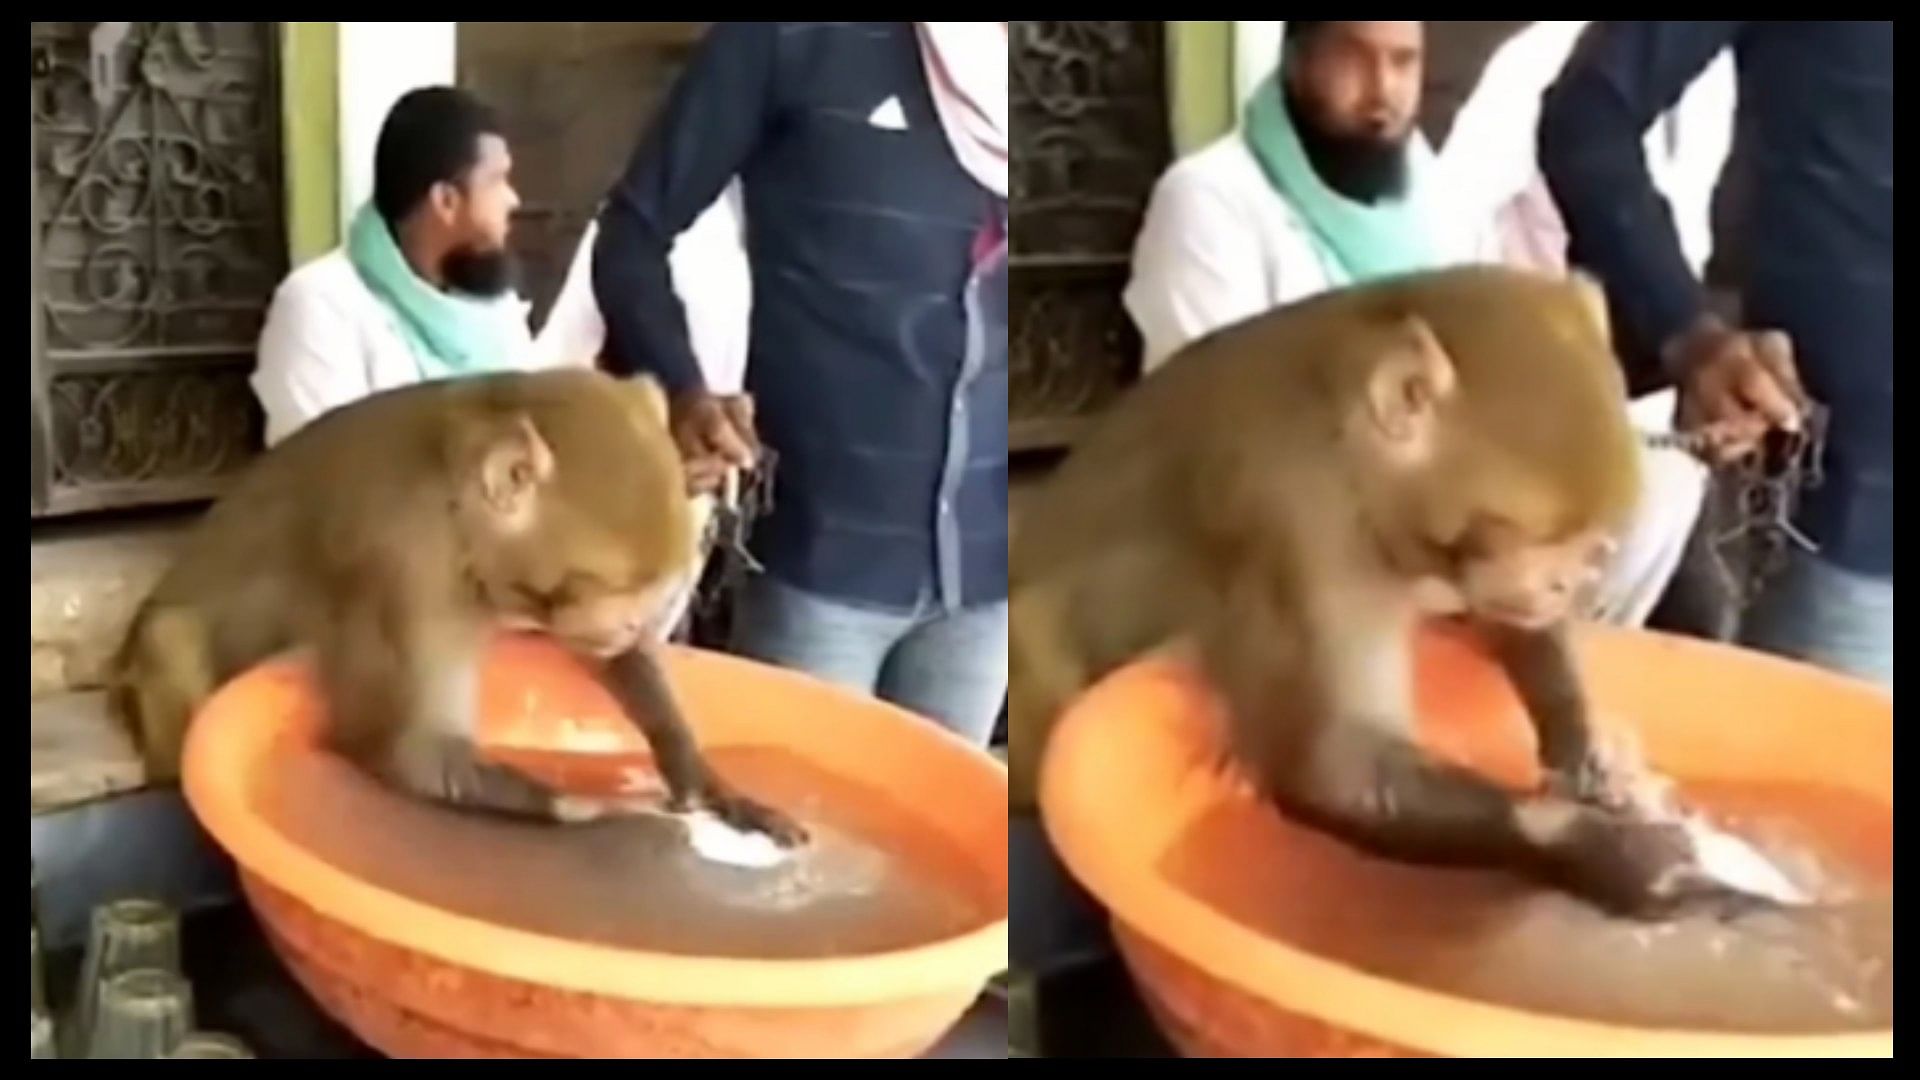 Monkey washing plate in dhaba video goes viral on social media